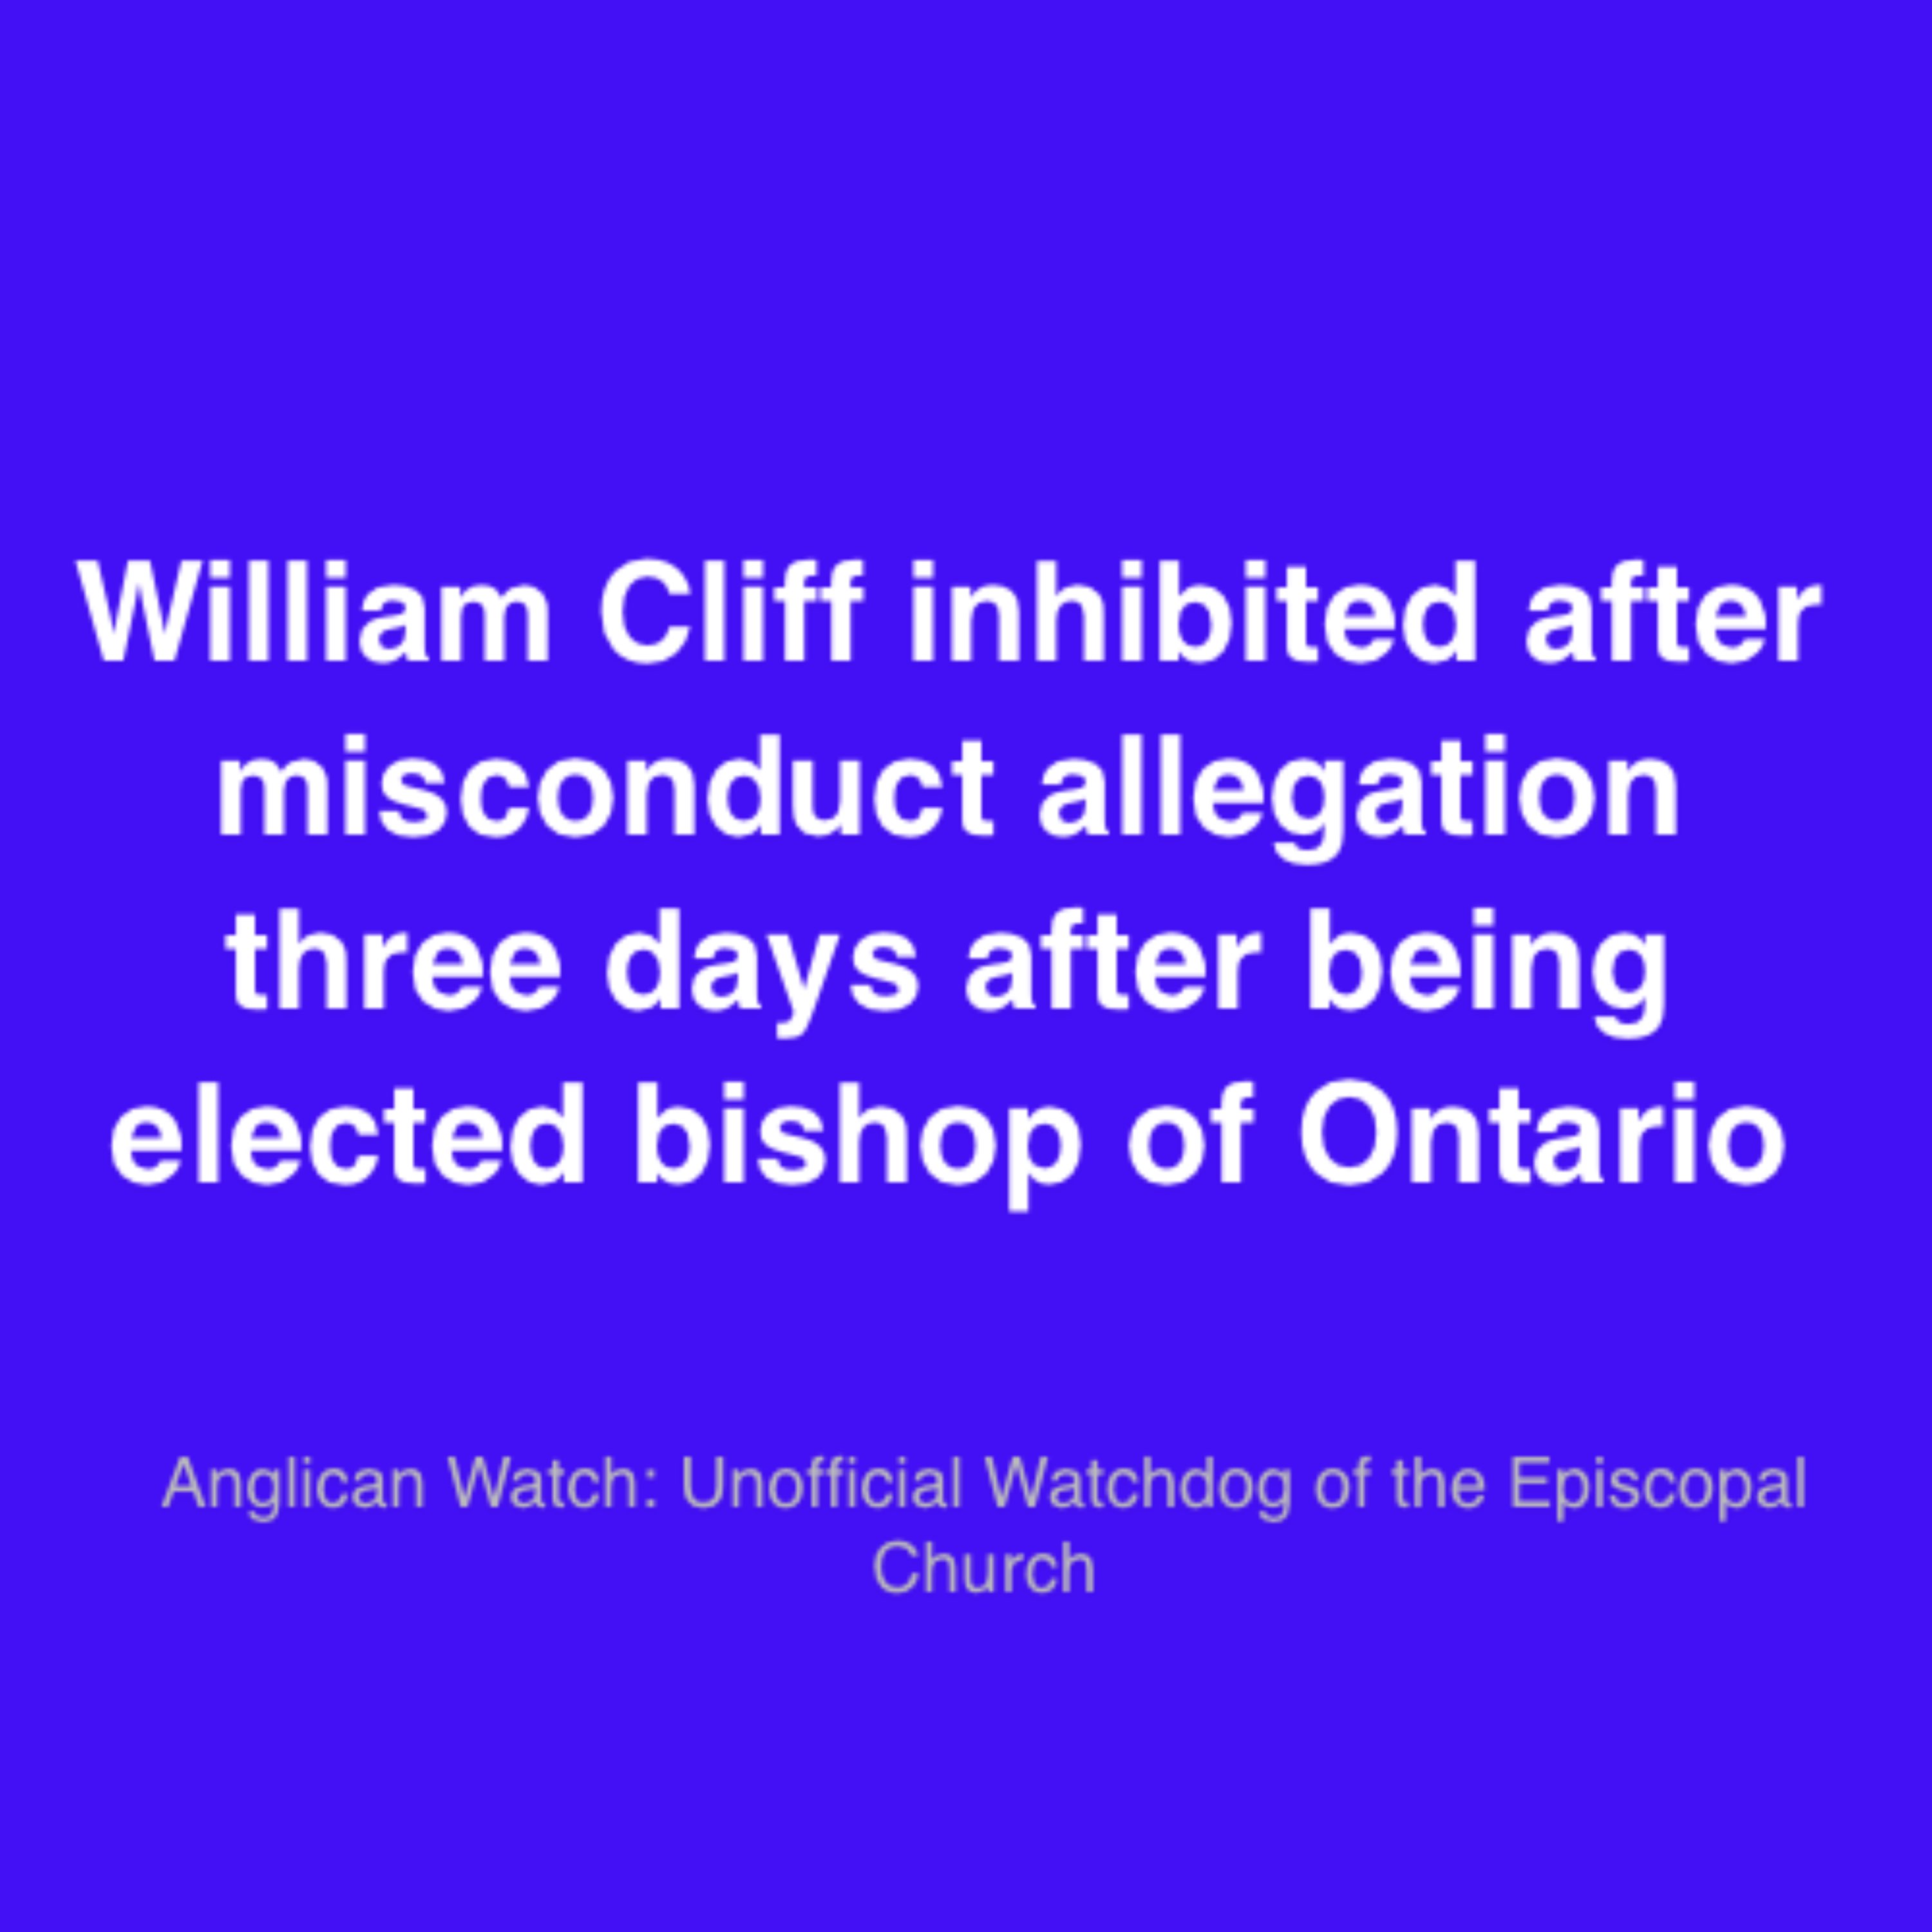 William Cliff inhibited after misconduct allegation three days after being elected bishop of Ontario